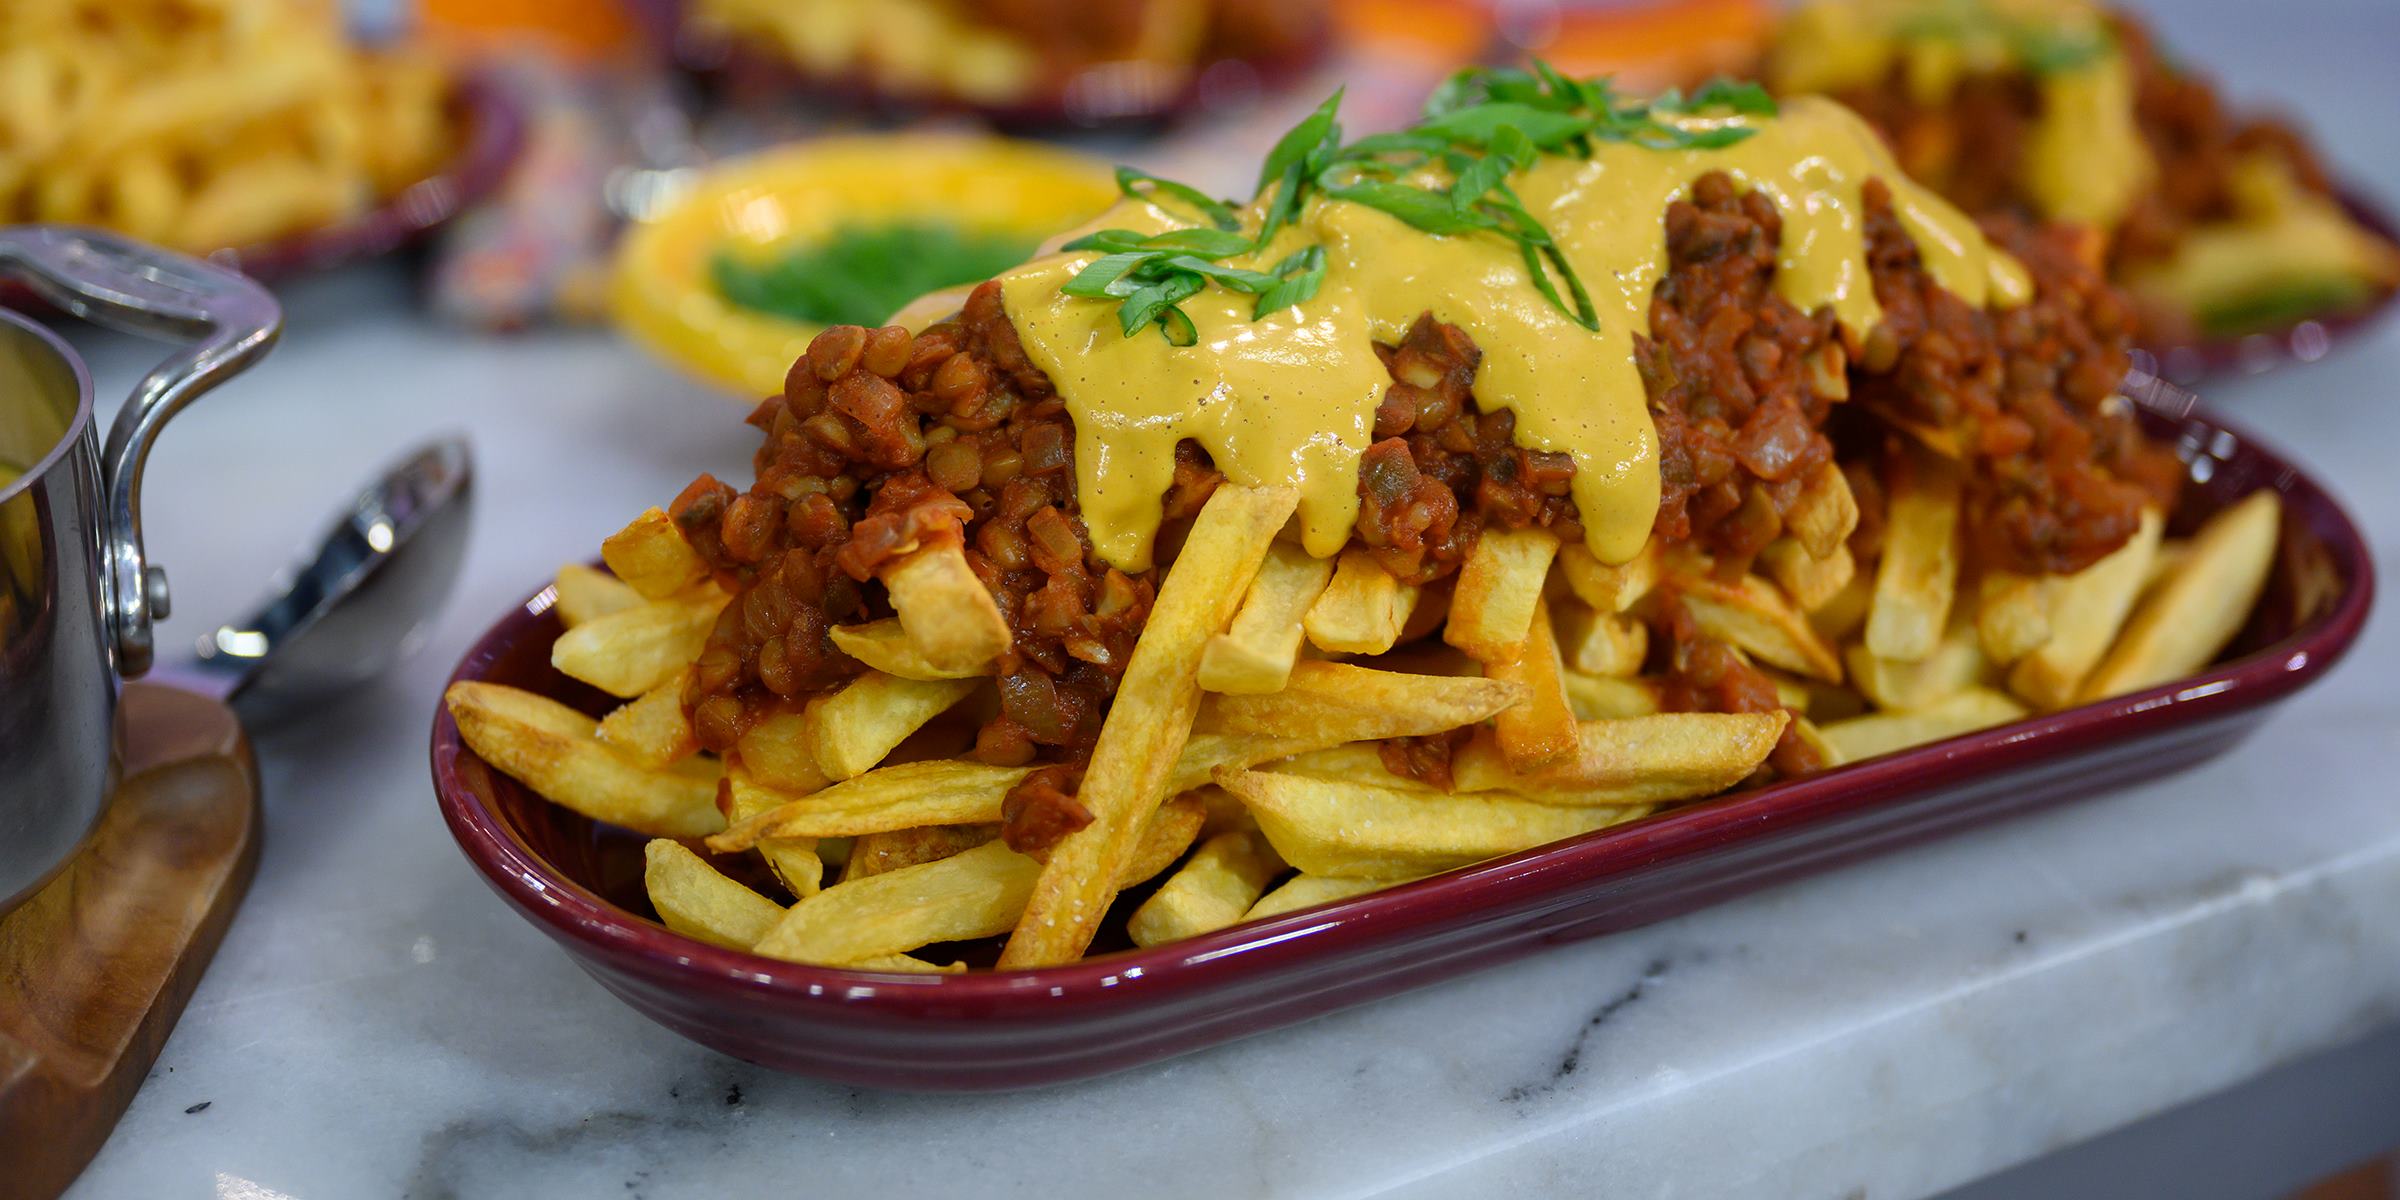 10-chili-cheese-fries-nutrition-facts